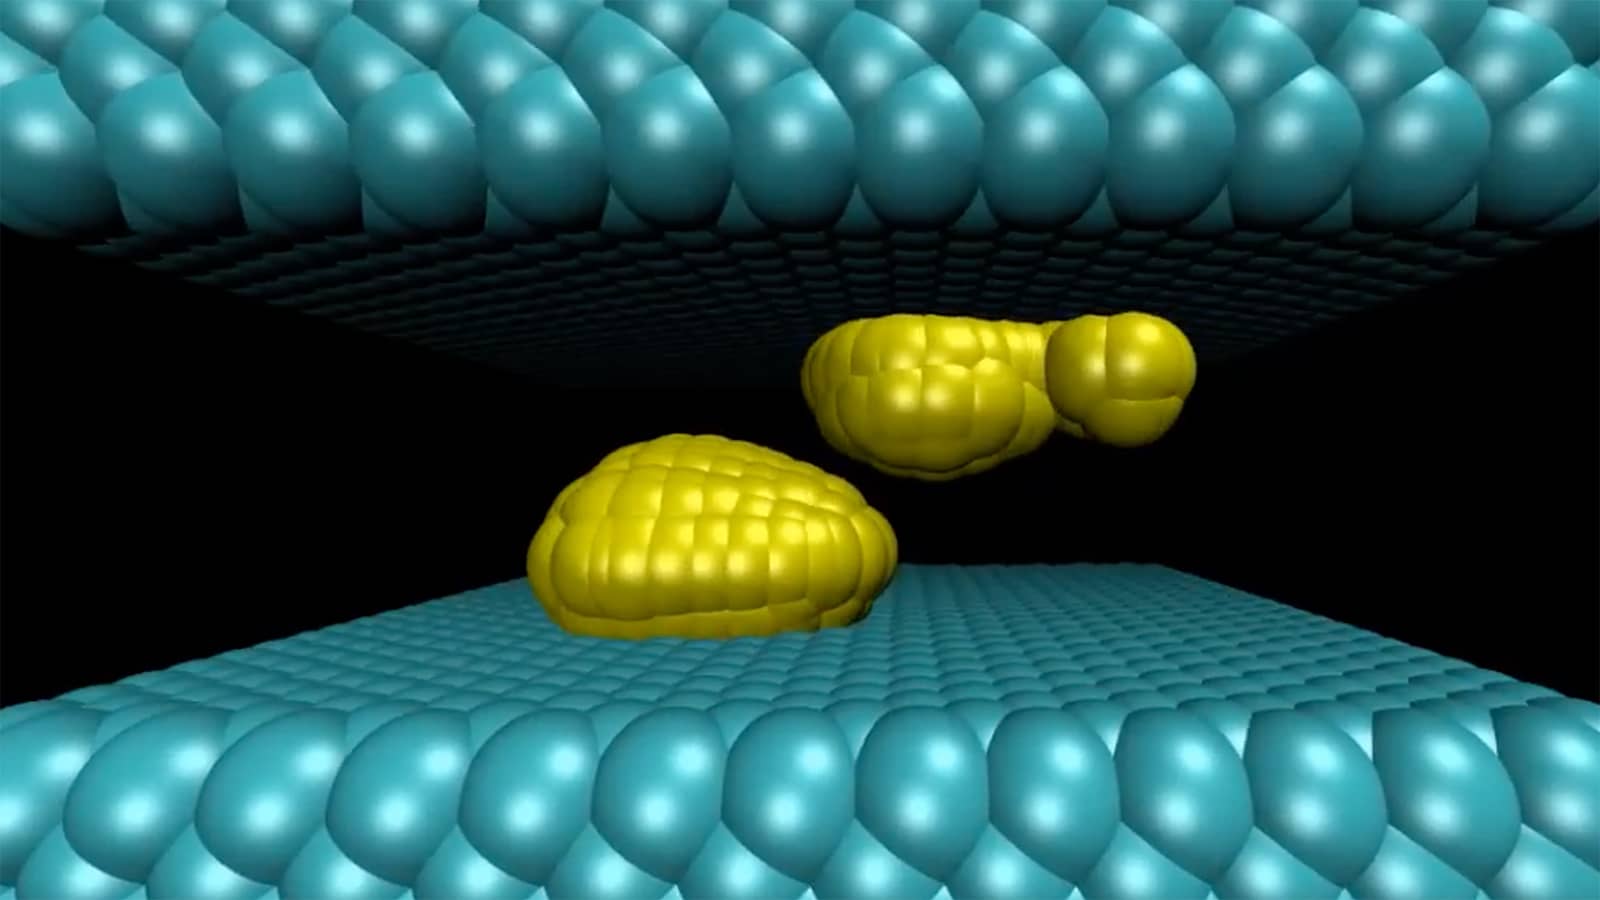 Scientific illustration of blue and yellow bubbles: Bubbles collide in biological self-assembly